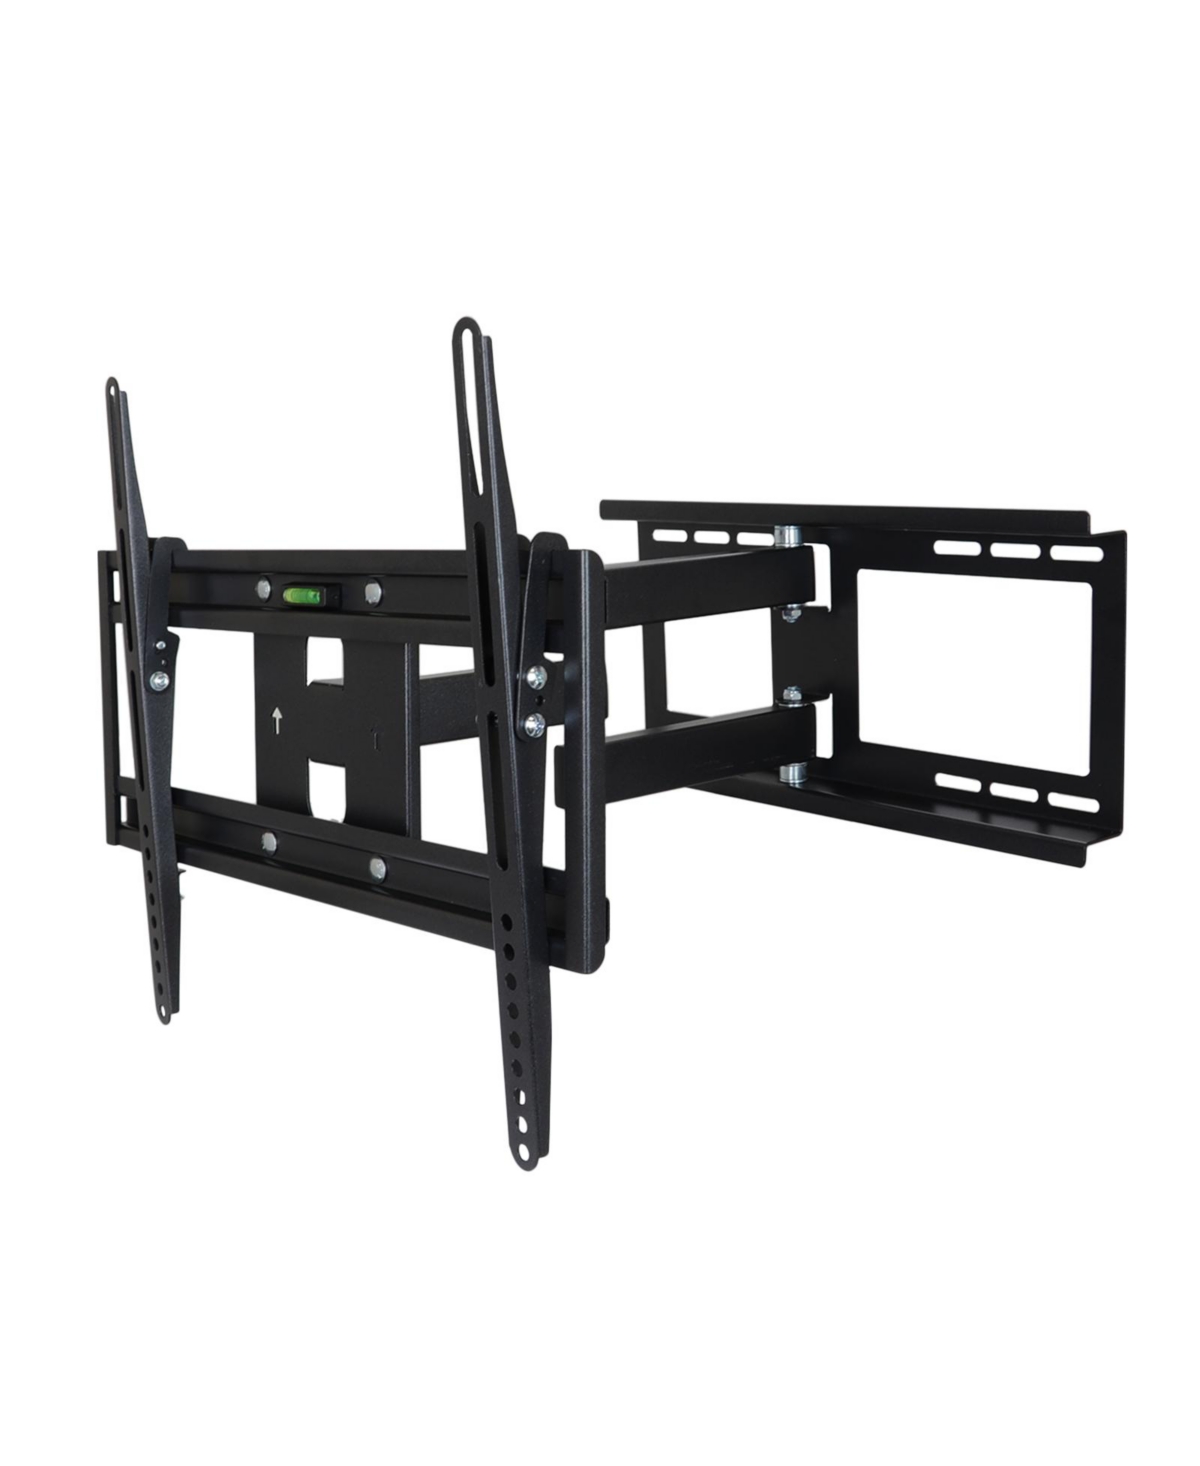 Full Motion 26-55" Wall Mount with Bubble Level - Black